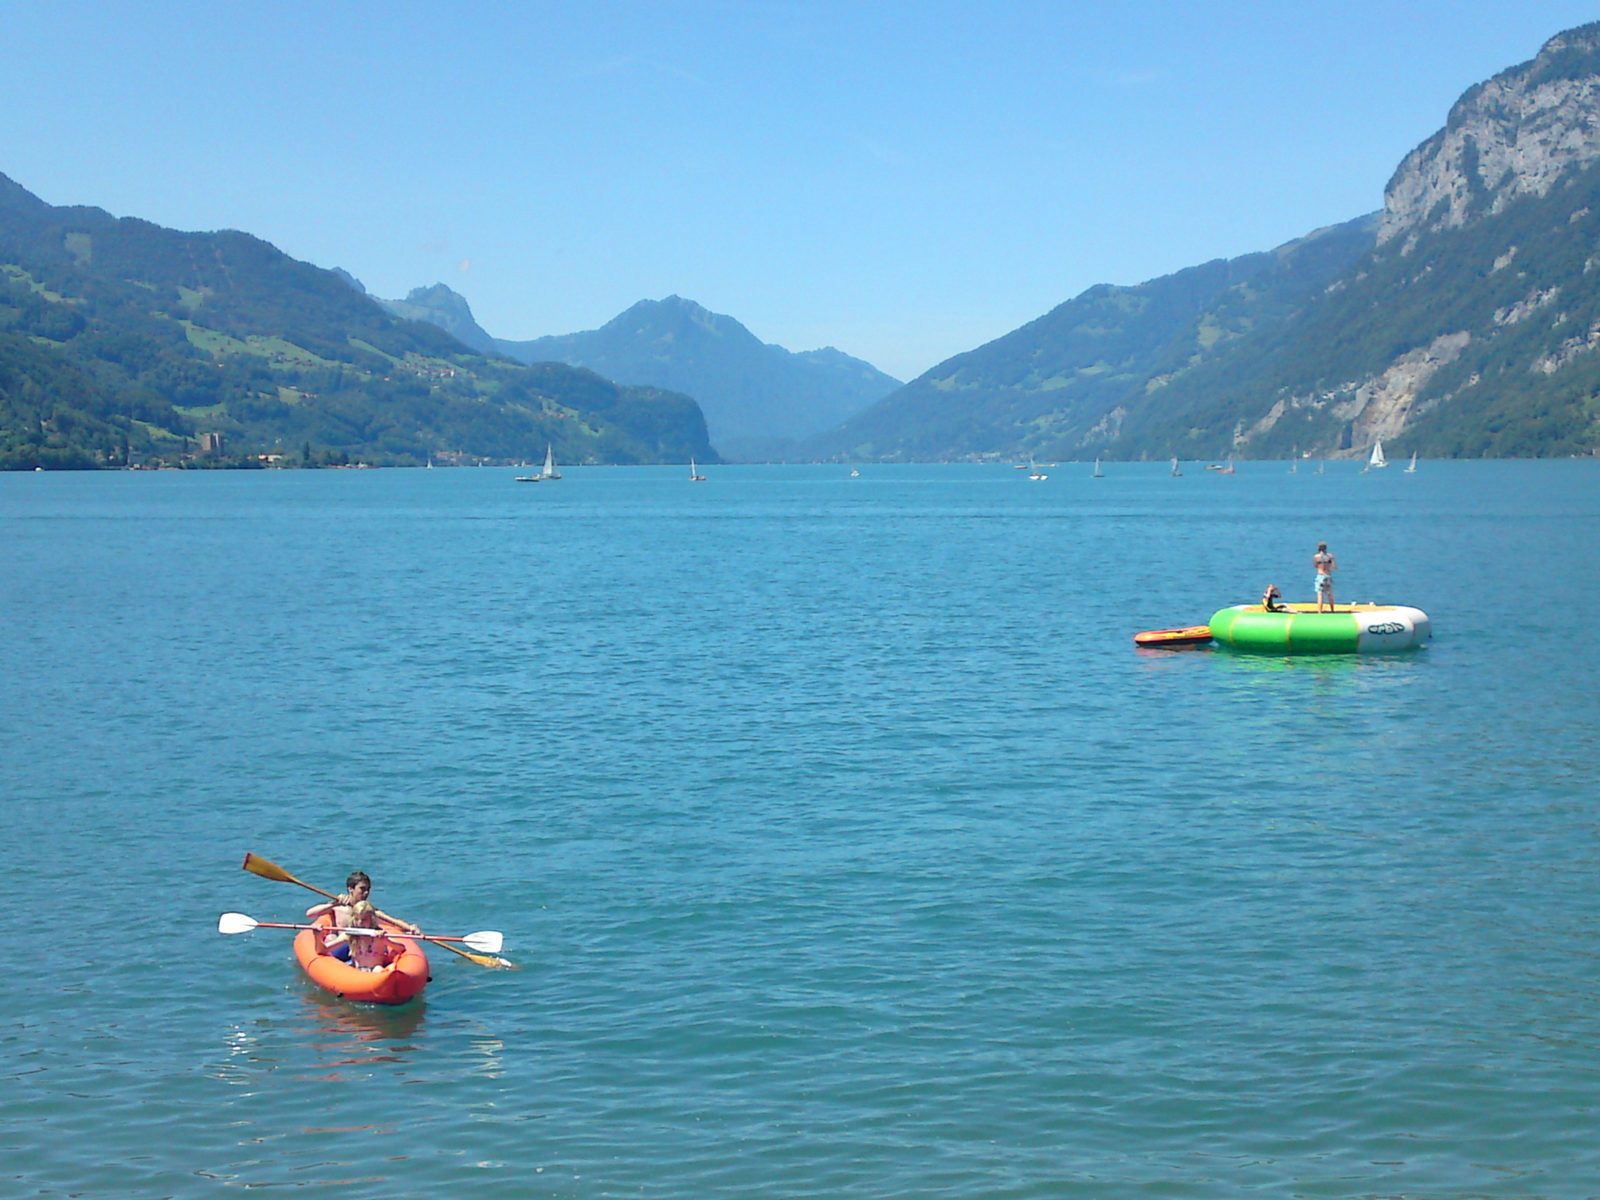 Water sports on the Walensee